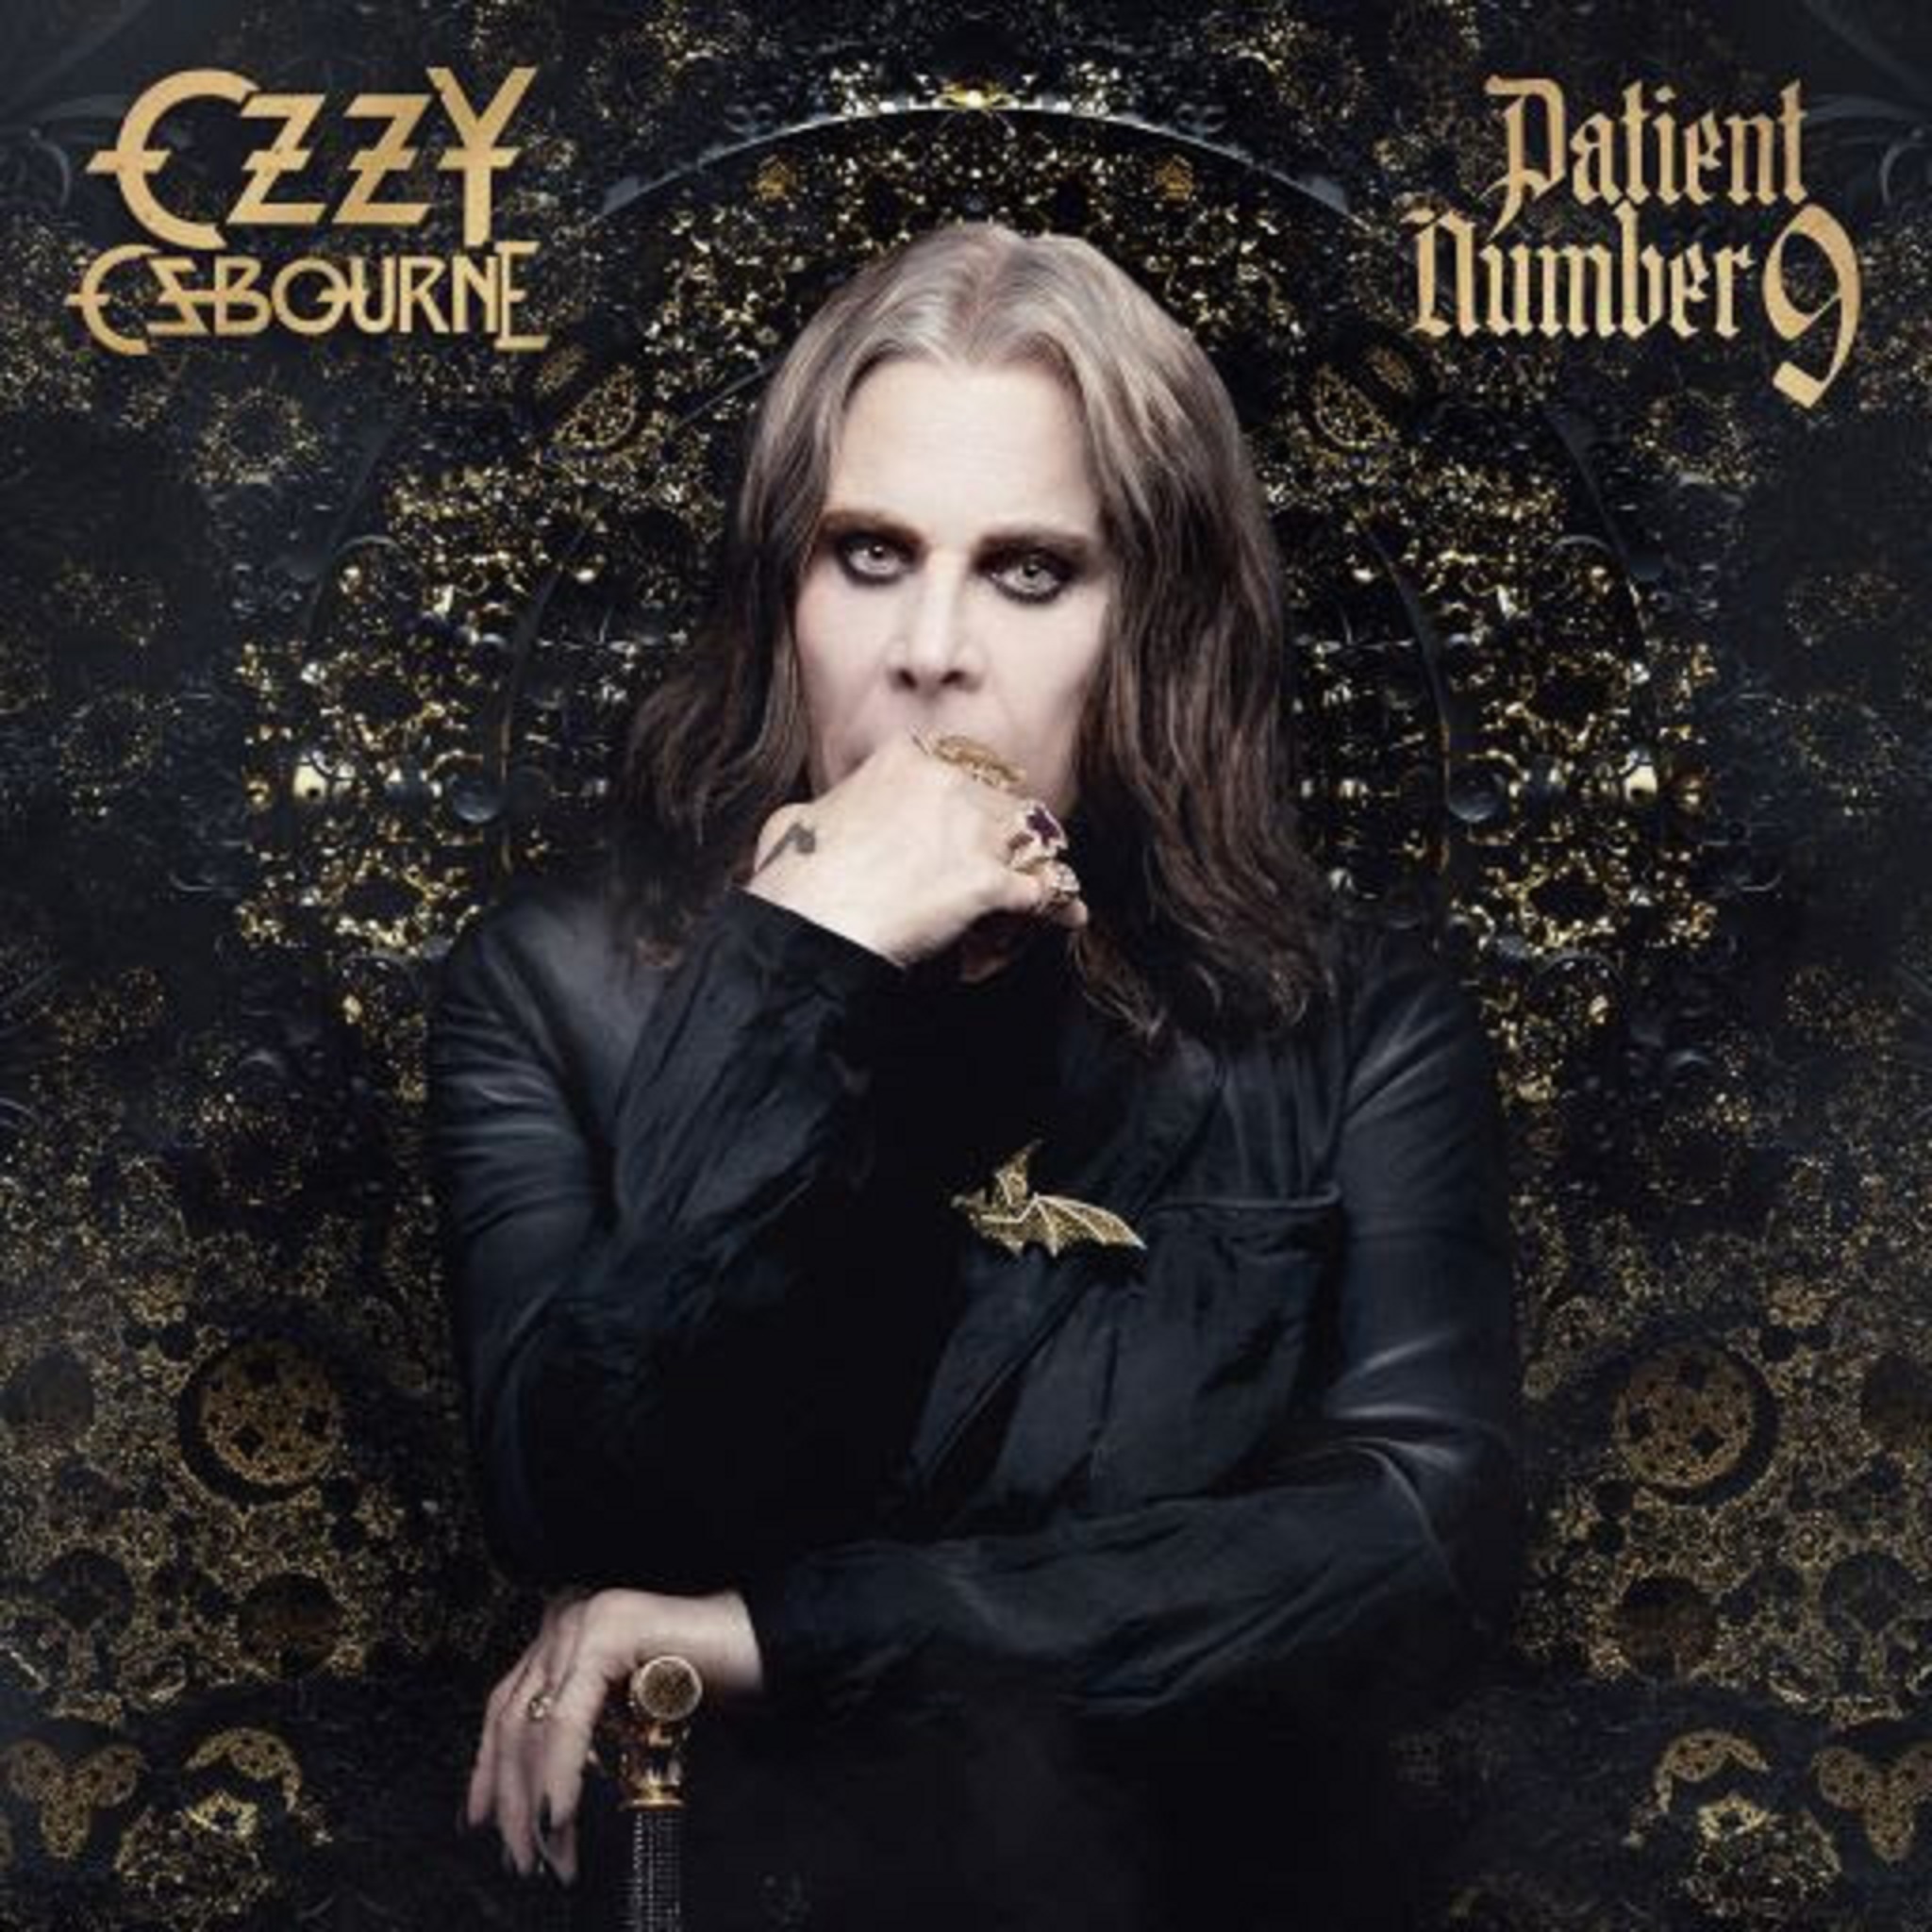 OZZY OSBOURNE Confirms September 9 As Release Date For New Album ‘Patient Number 9’ (Epic); Debuts Todd McFarlance Video For Title Track